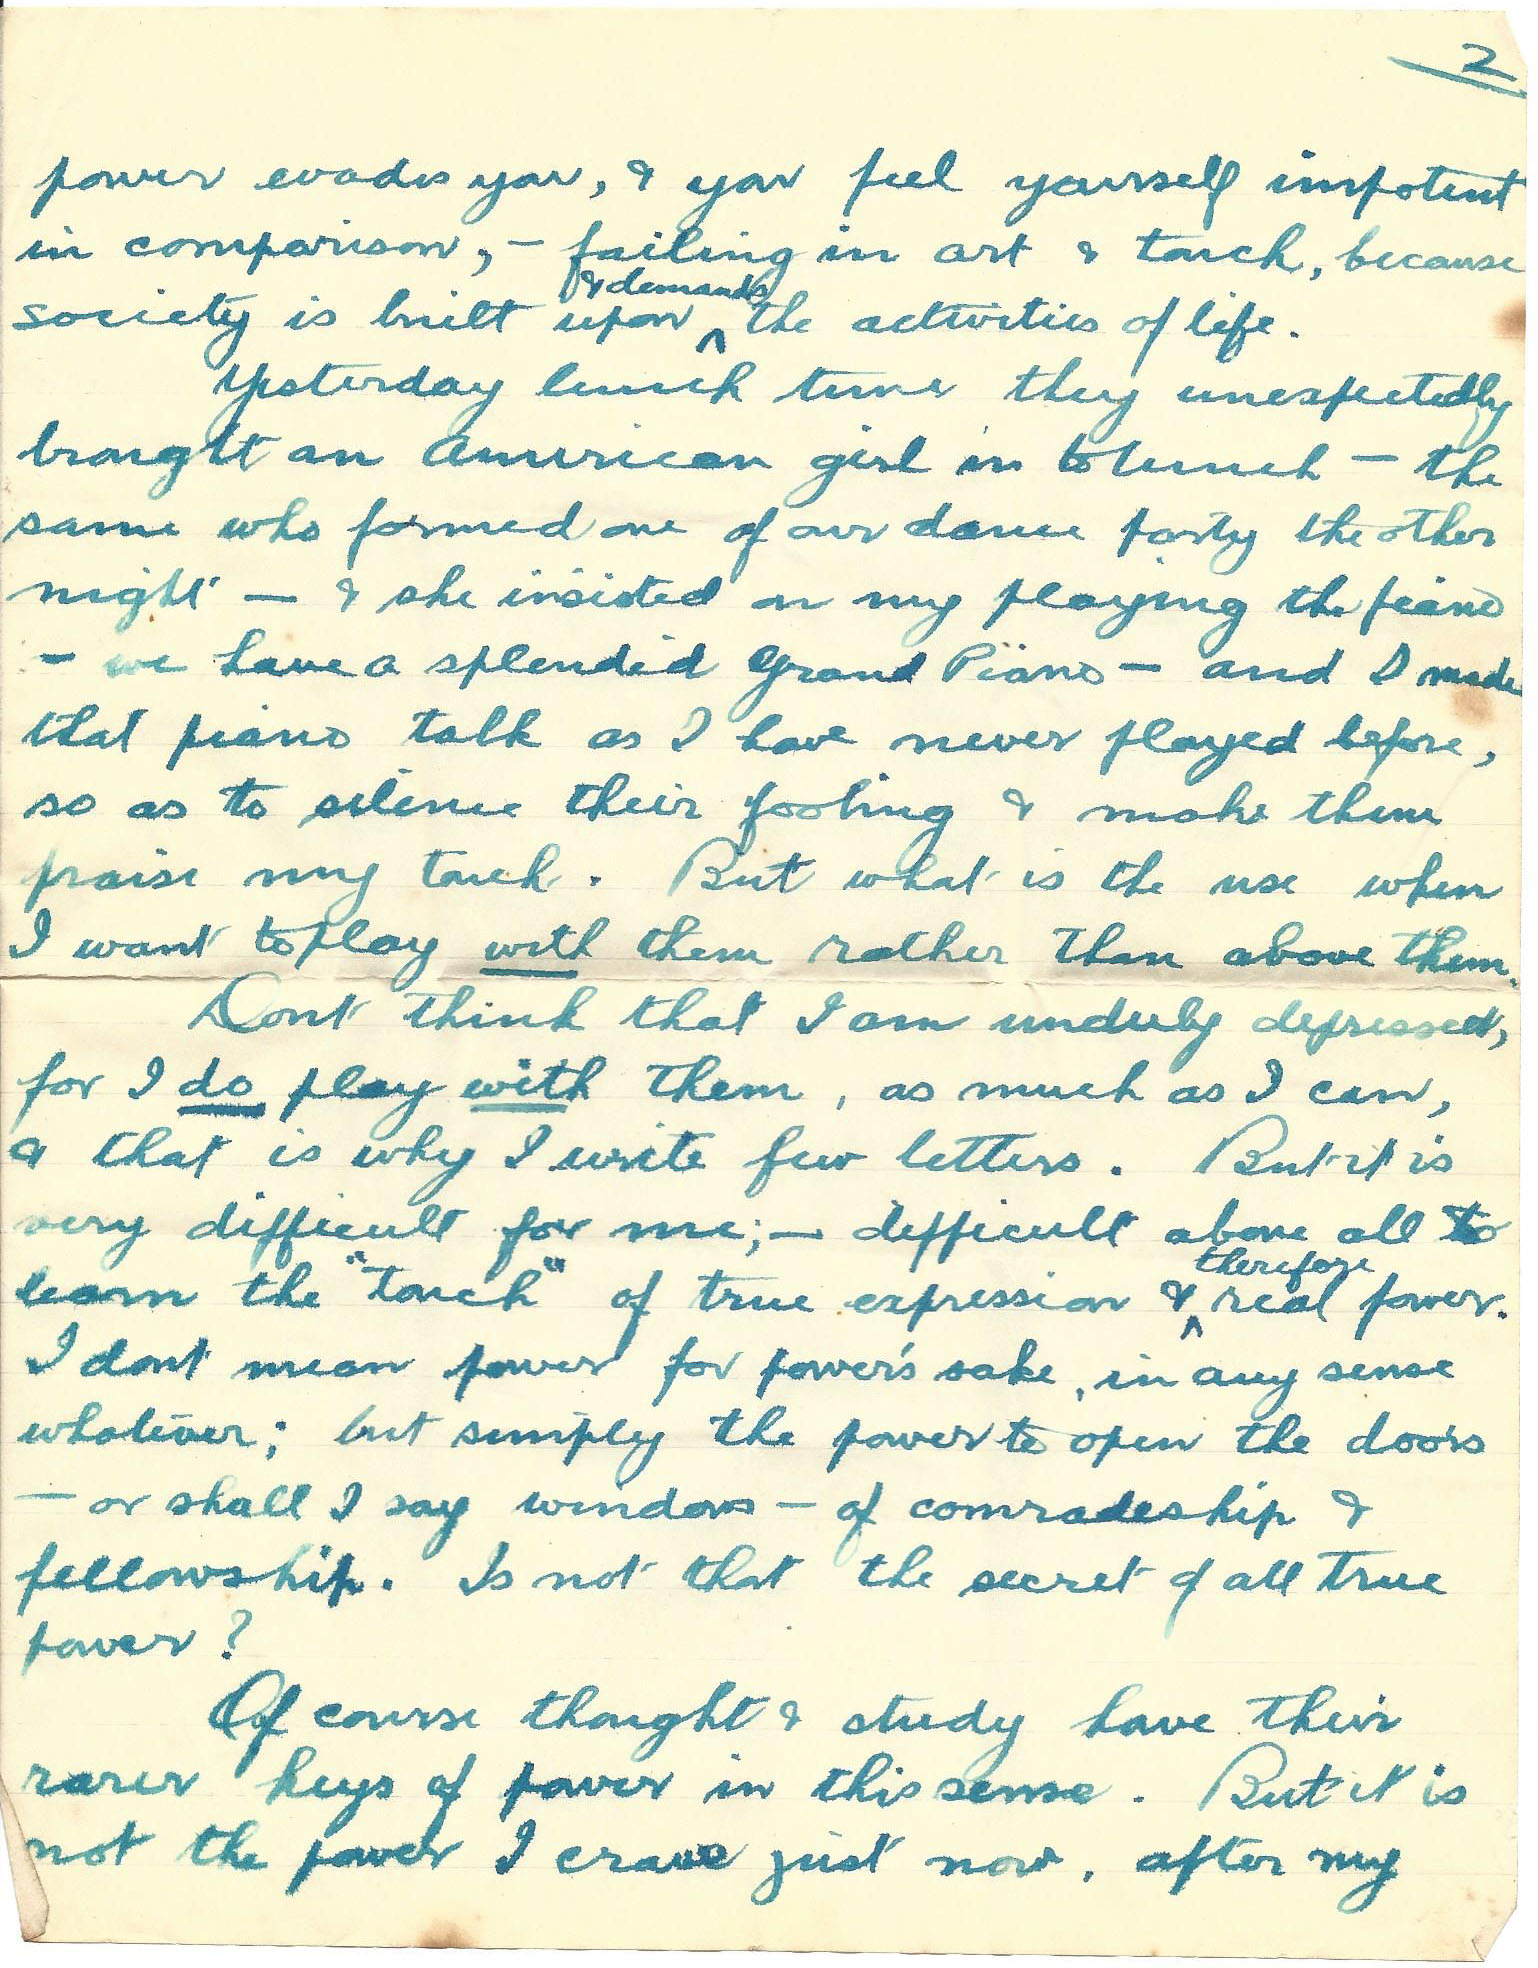 1919-08-19 p2 Donald Bearman letter to his father